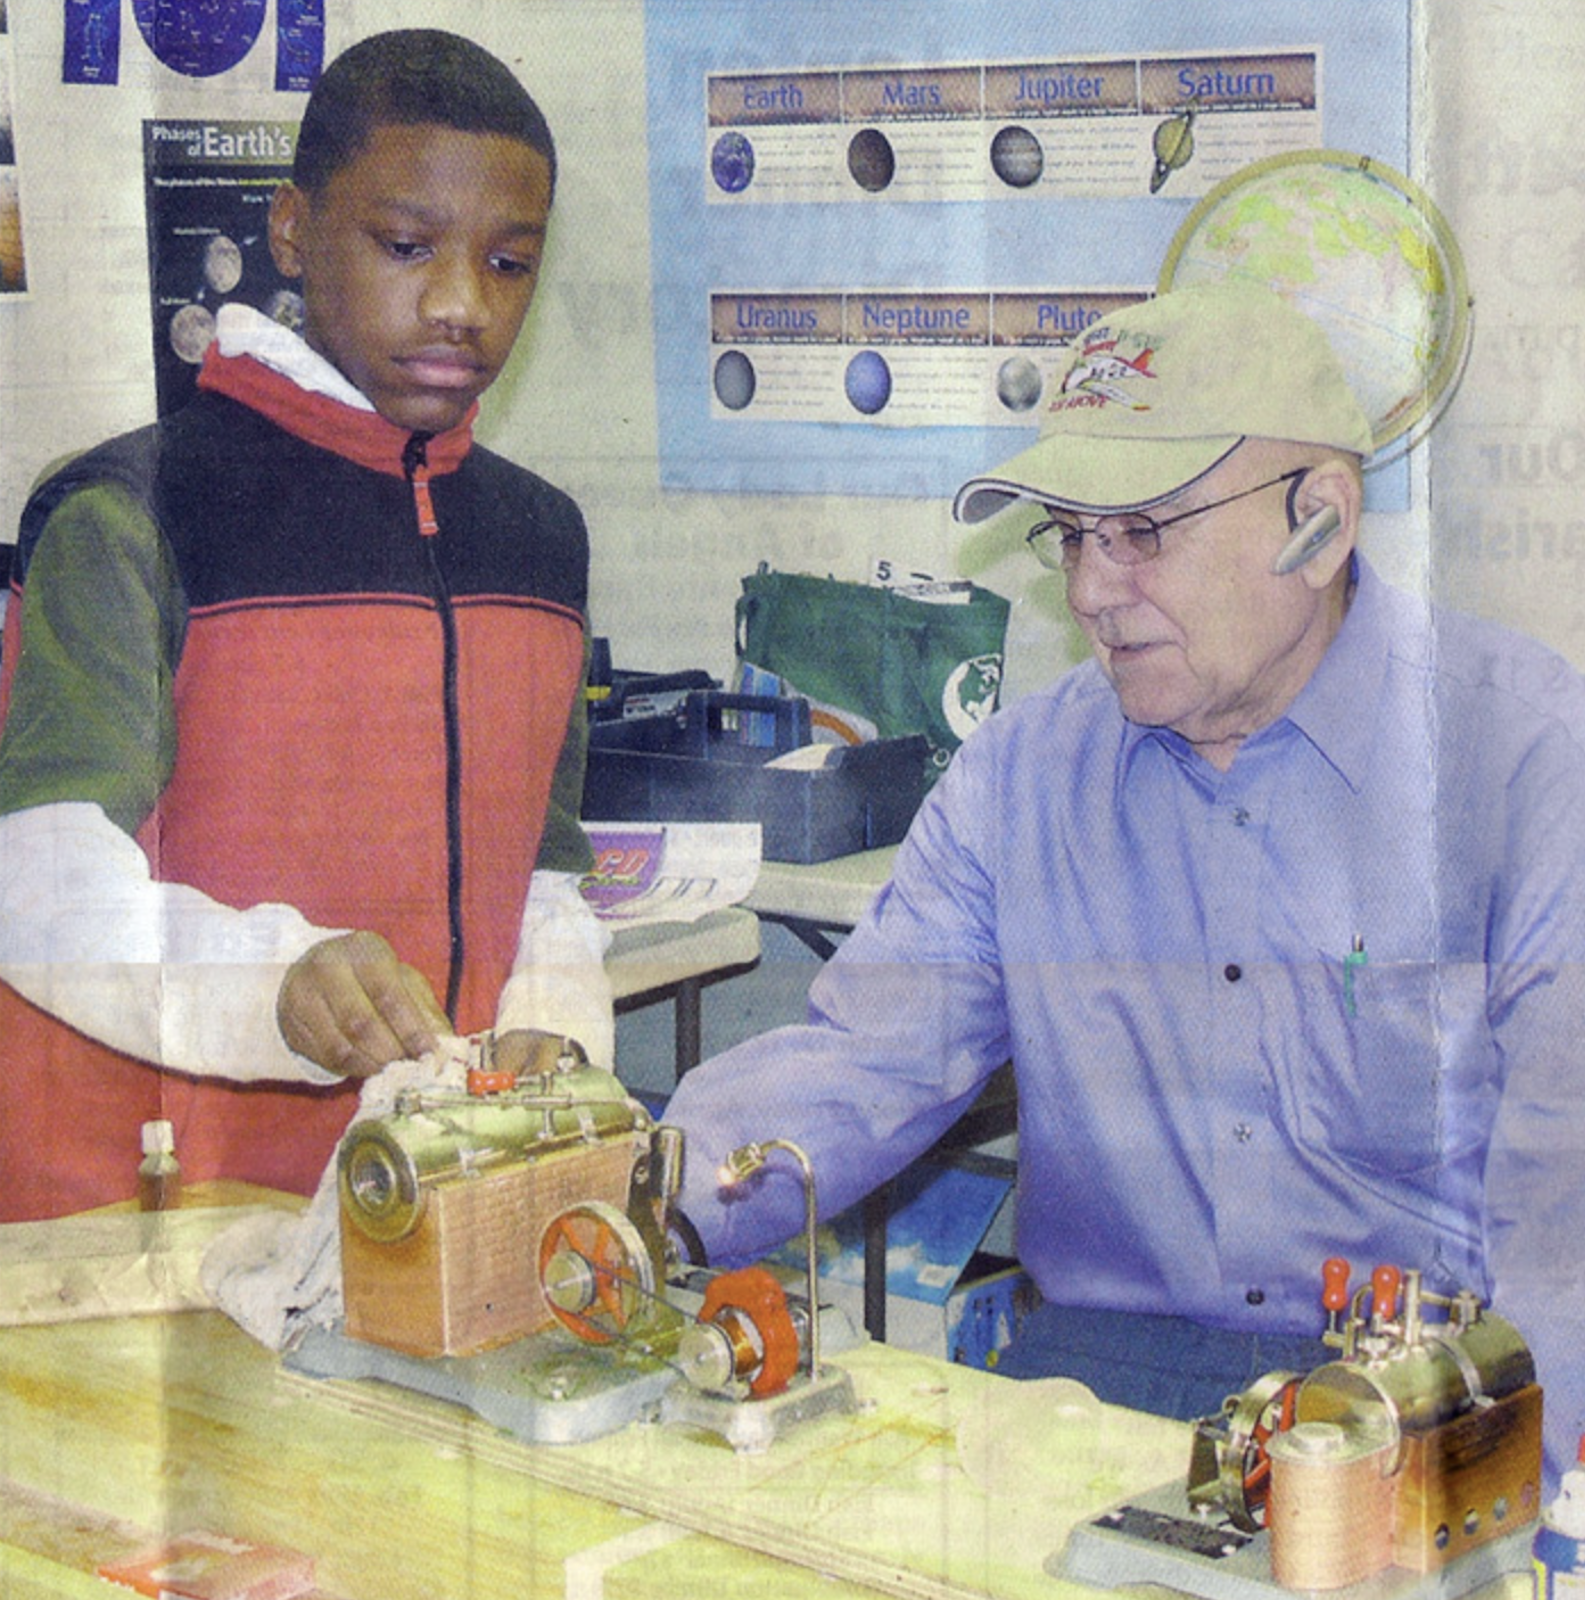 After retiring from his job in 1999, Deacon Delbeke entered ministry full-time, and in the early 2000s, he received a grant to establish a program in Detroit to teach young people engineering and technical skills called the Tuskegee Spirits.